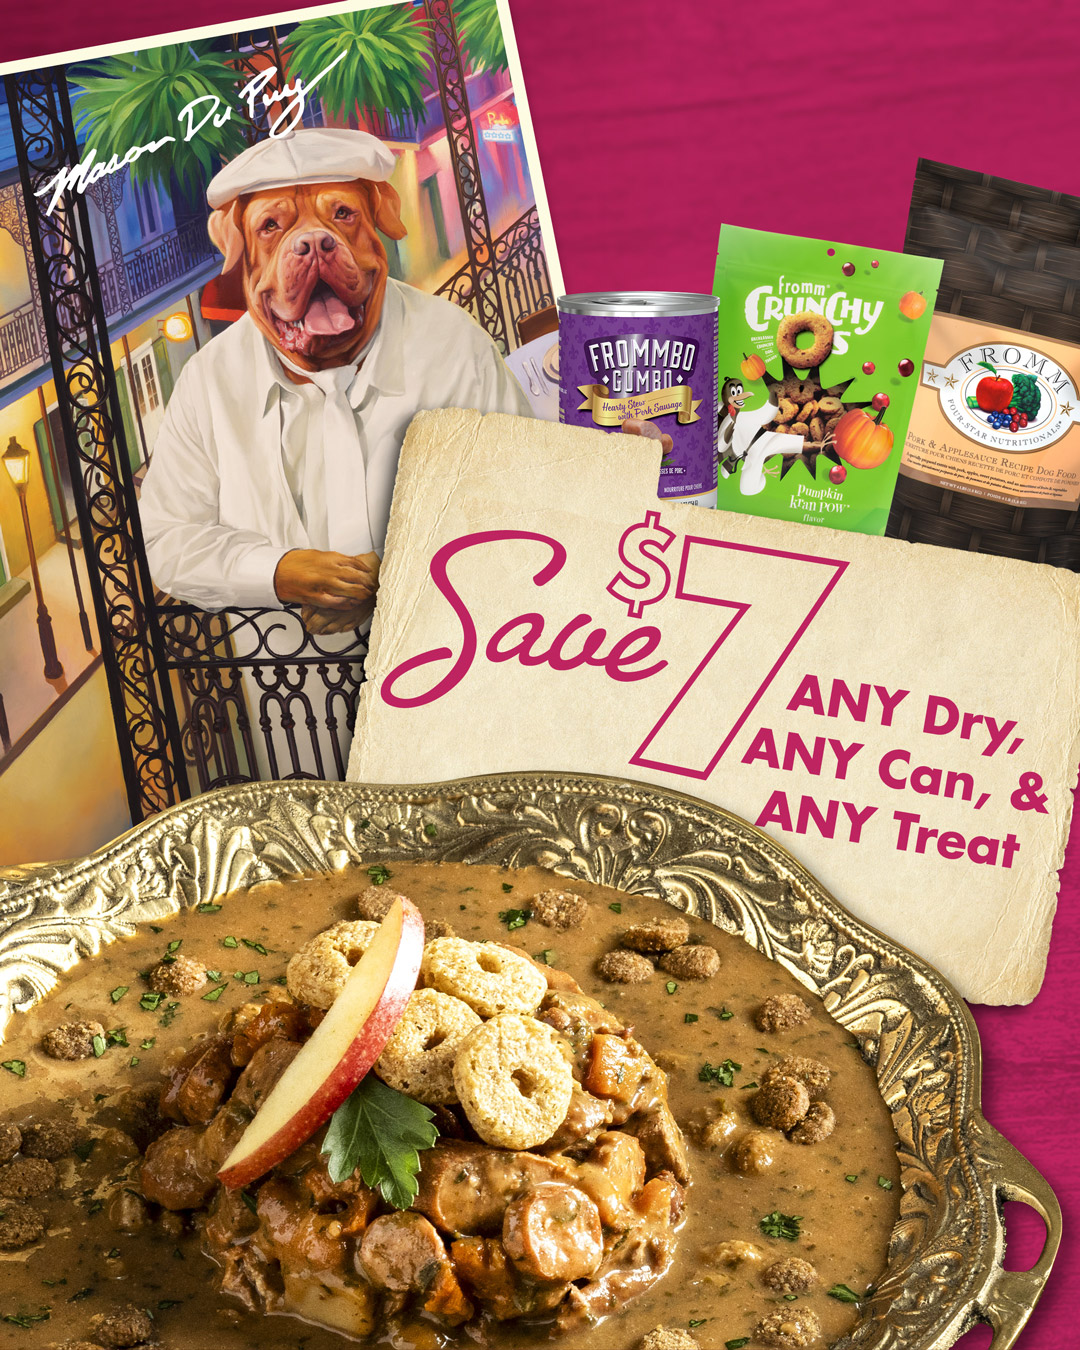 Save $7 when you buy any dry, any can, & any treat